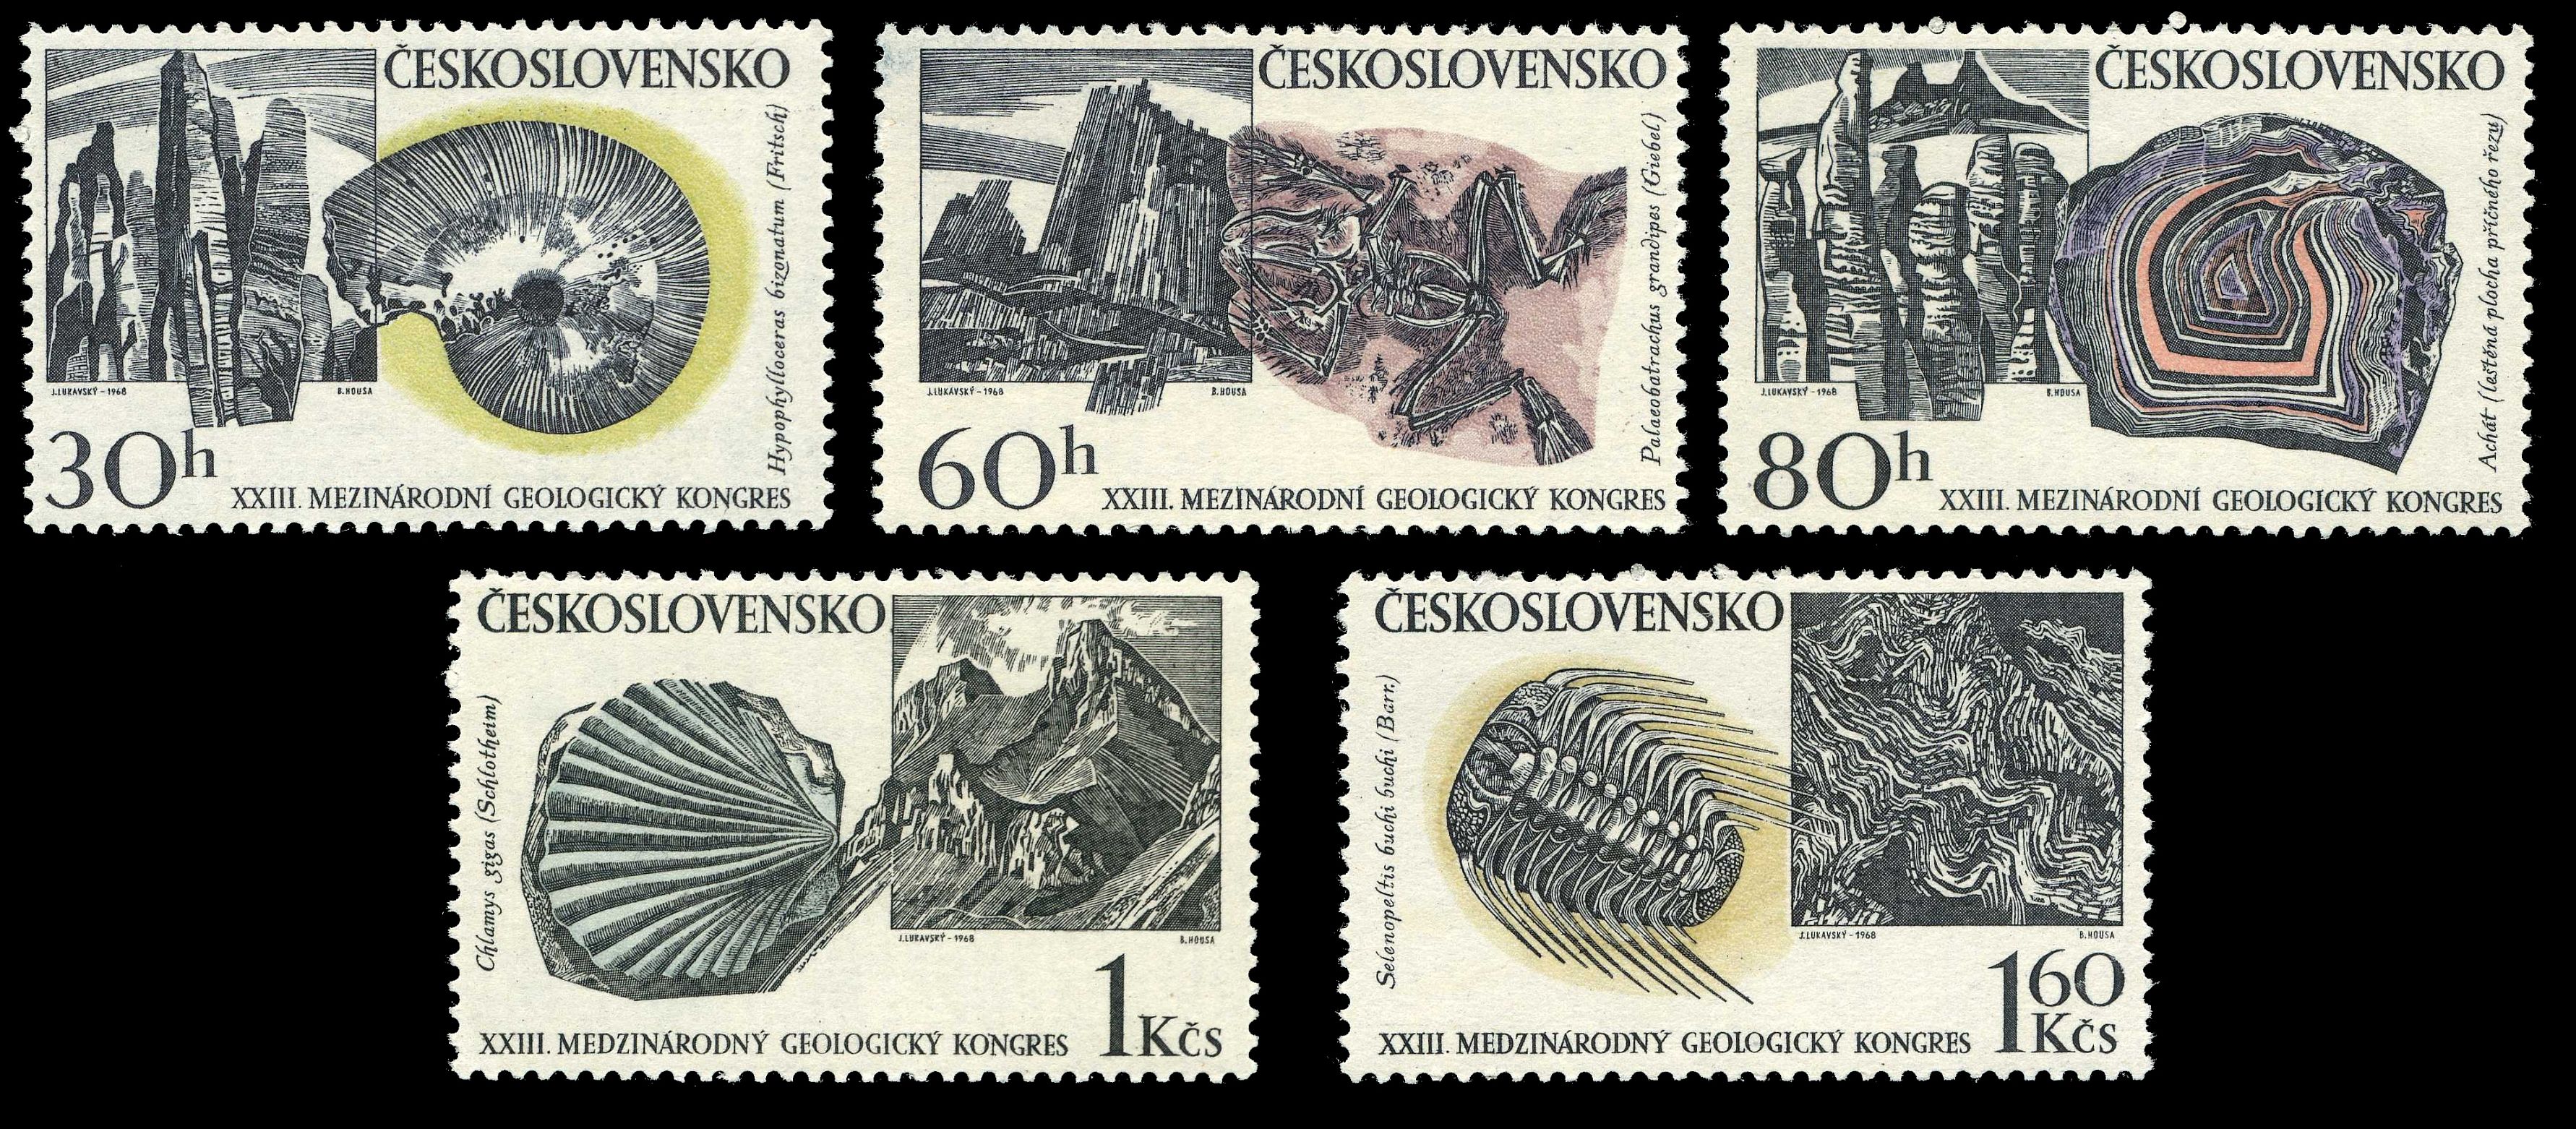 Fossils on stamps of Czechoslovakia